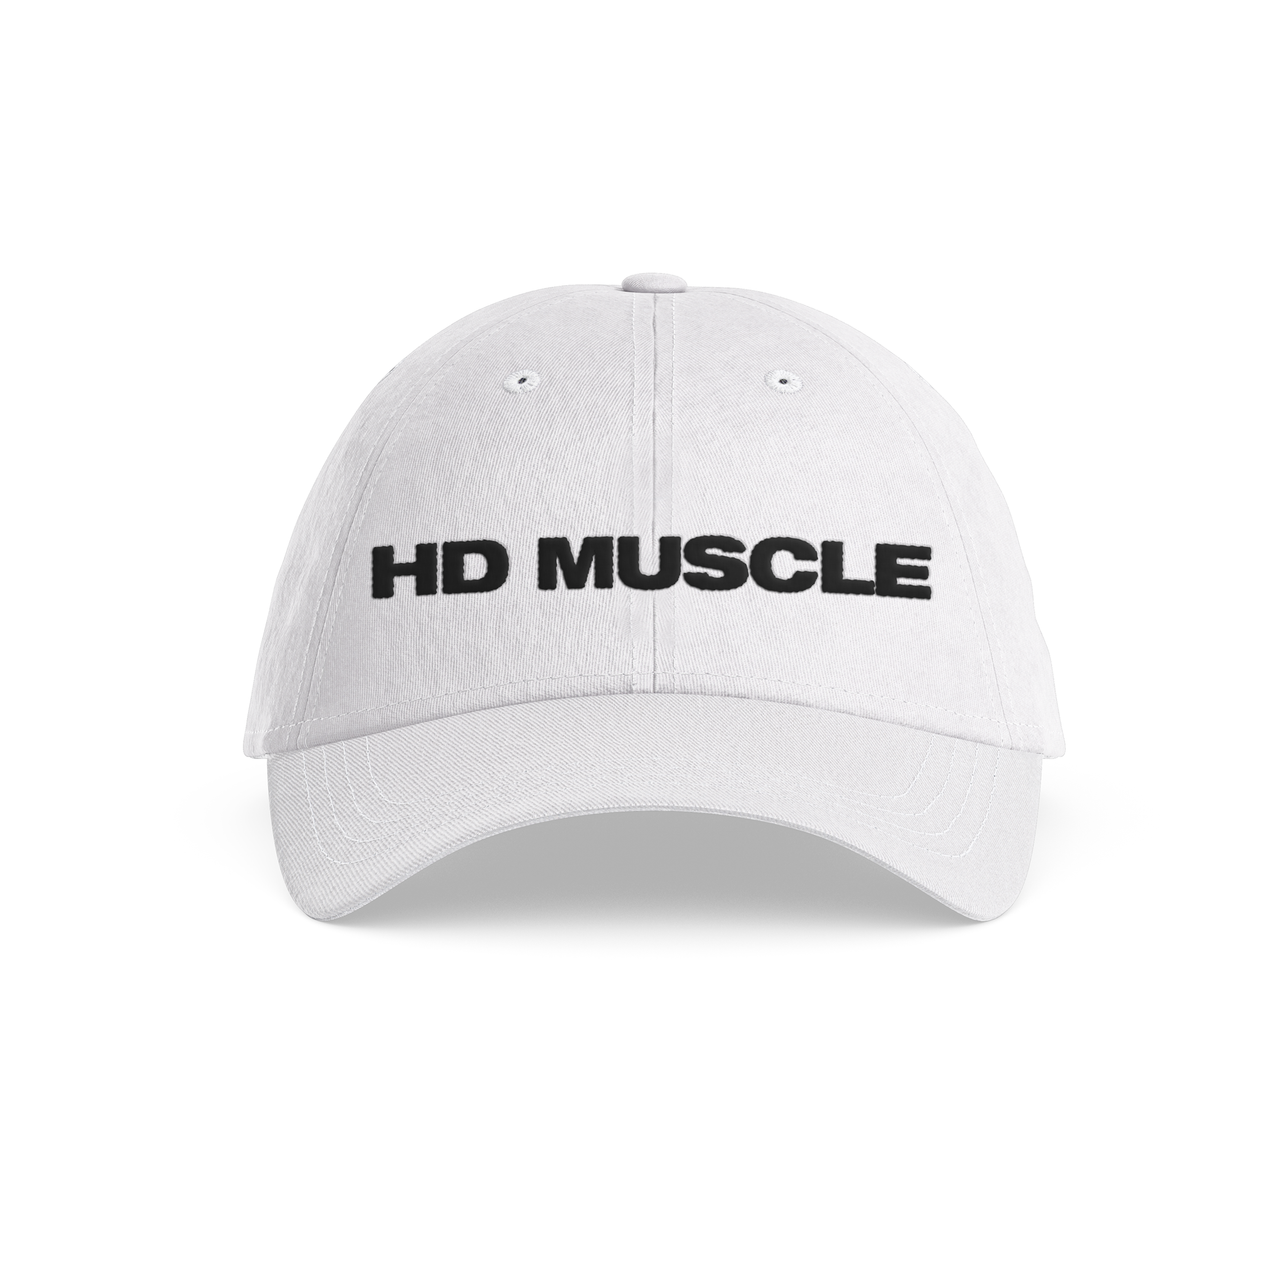 HD Muscle Dad Hat